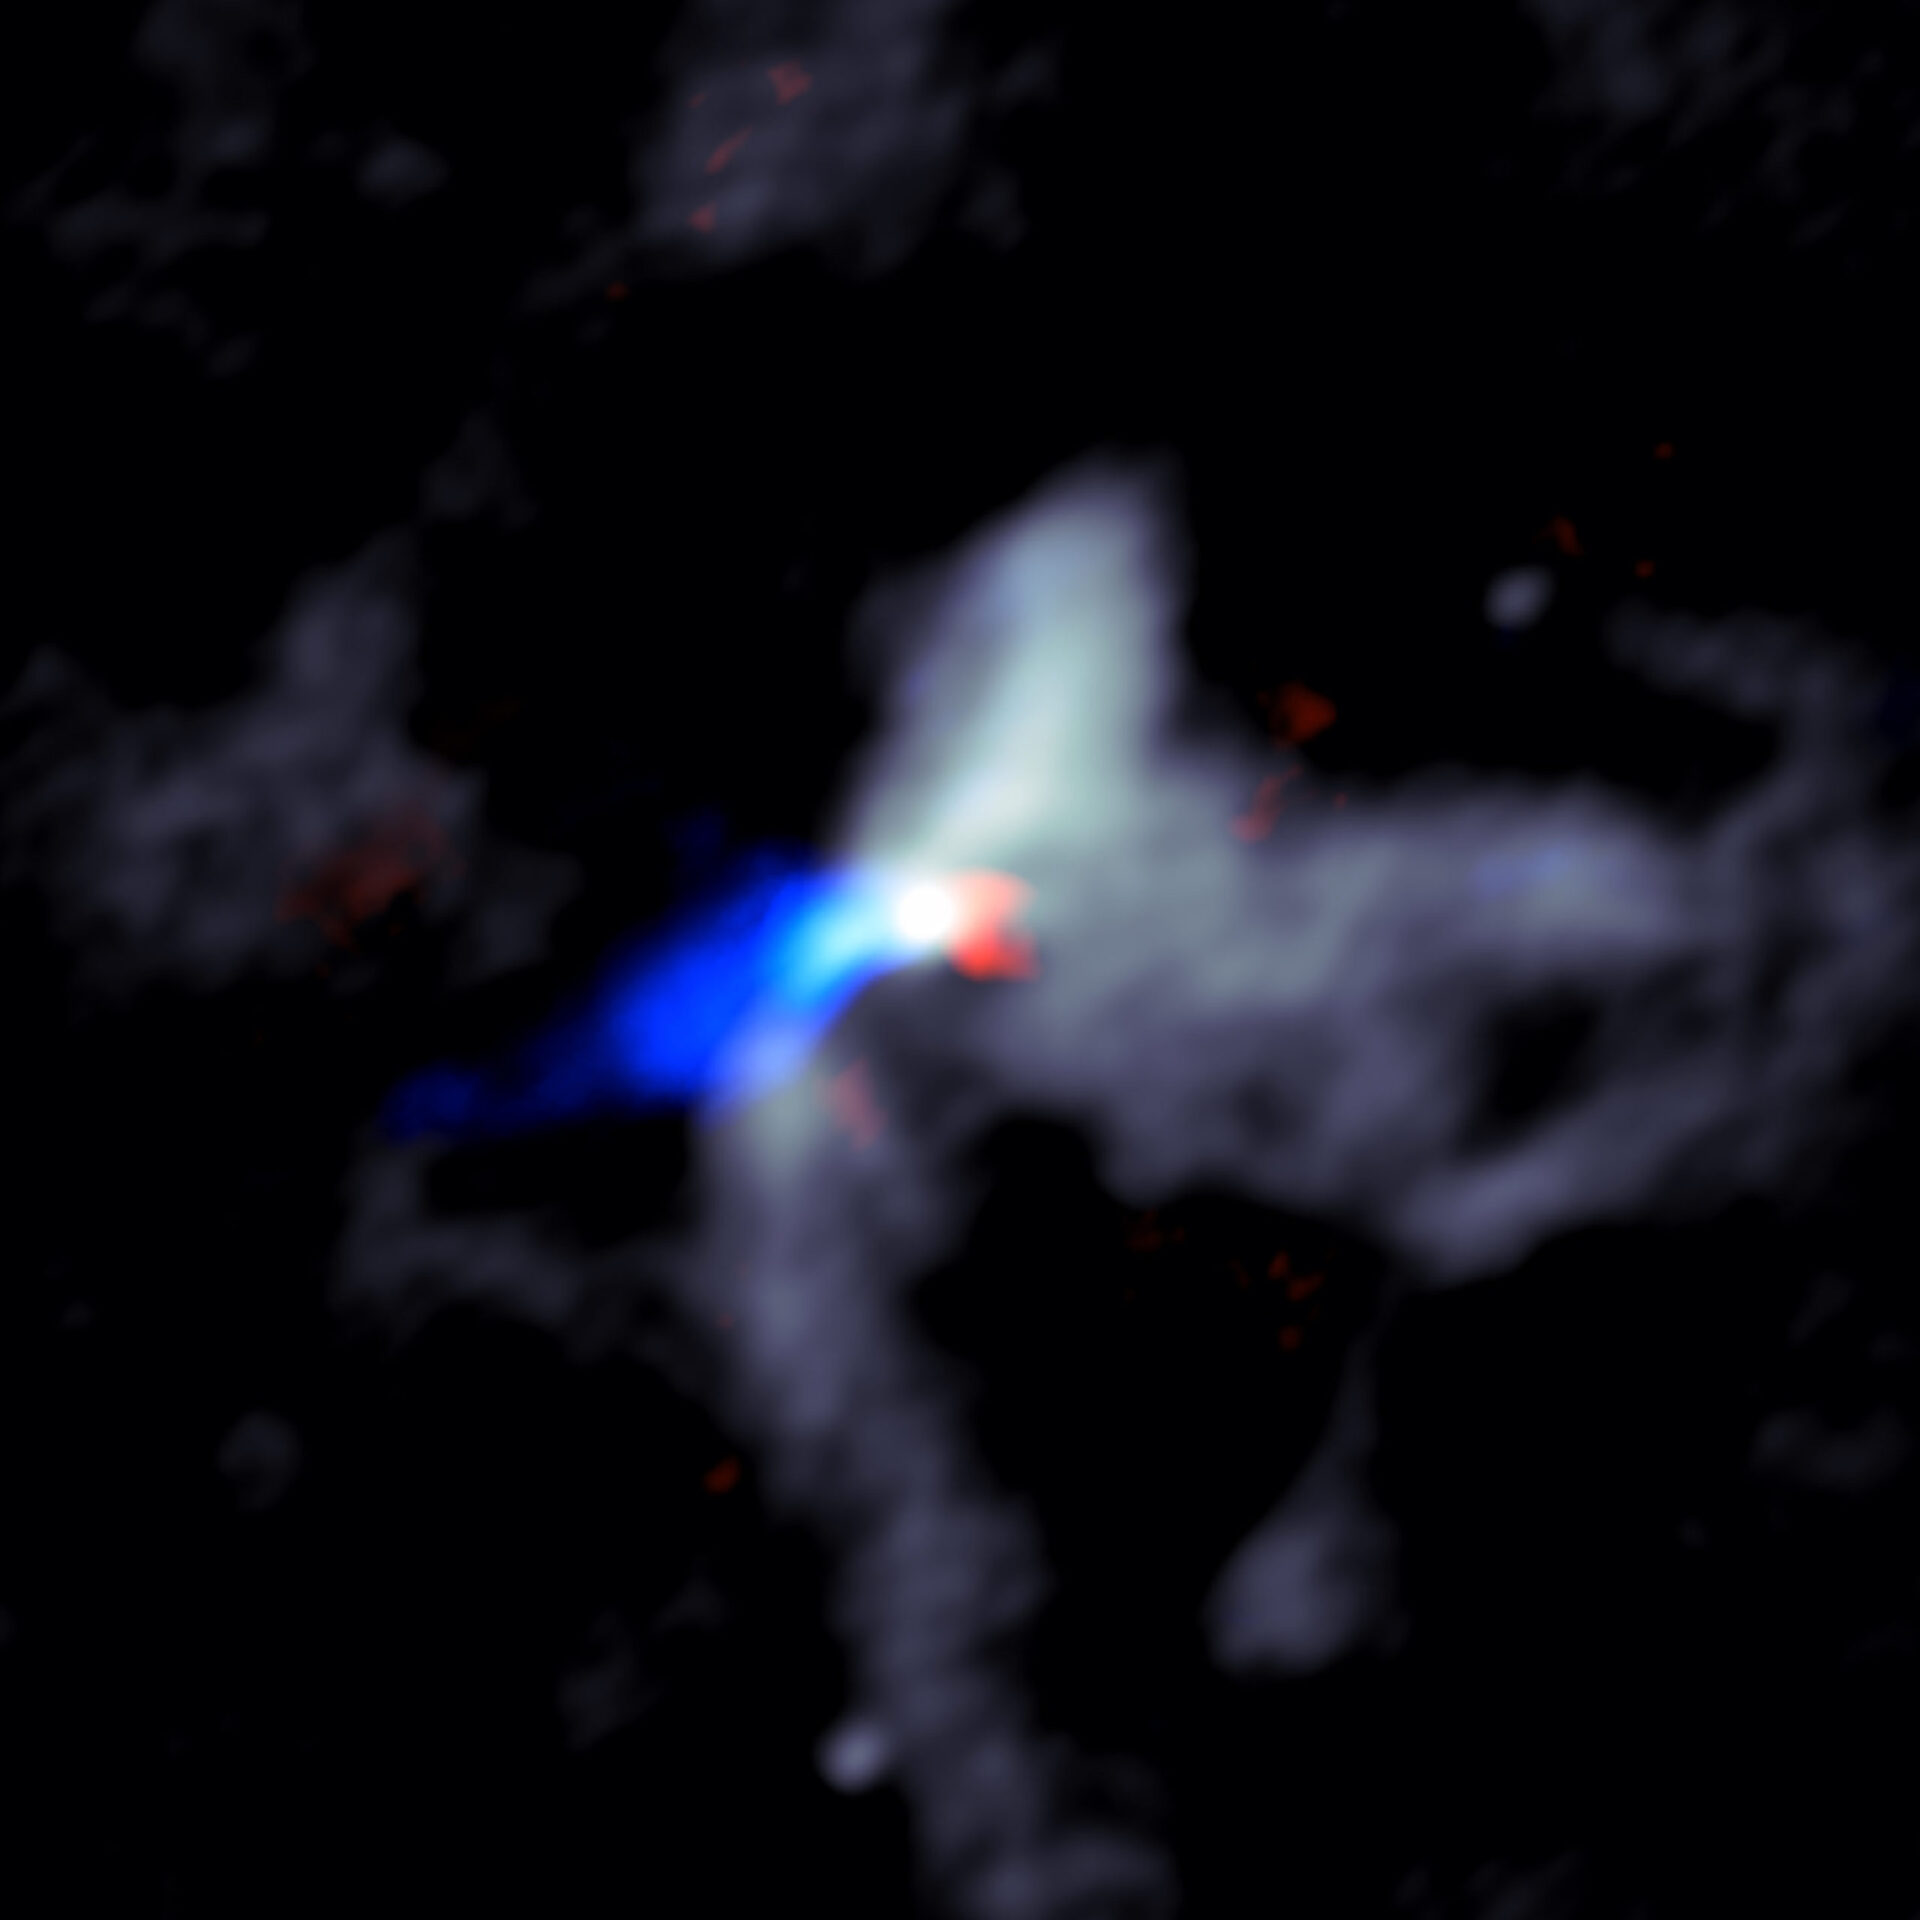 <p>ALMA image of the chaotic scene around a massive young protostar, in this case one called W51e8 . Grey shows dust close to the star, while the red and blue indicate material in the jets moving rapidly outward from the star. Red shows material moving away from Earth and blue material moving toward Earth. Credit: Goddi, Ginsburg, et al., Sophia Dagnello, NRAO/AUI/NSF.</p>
